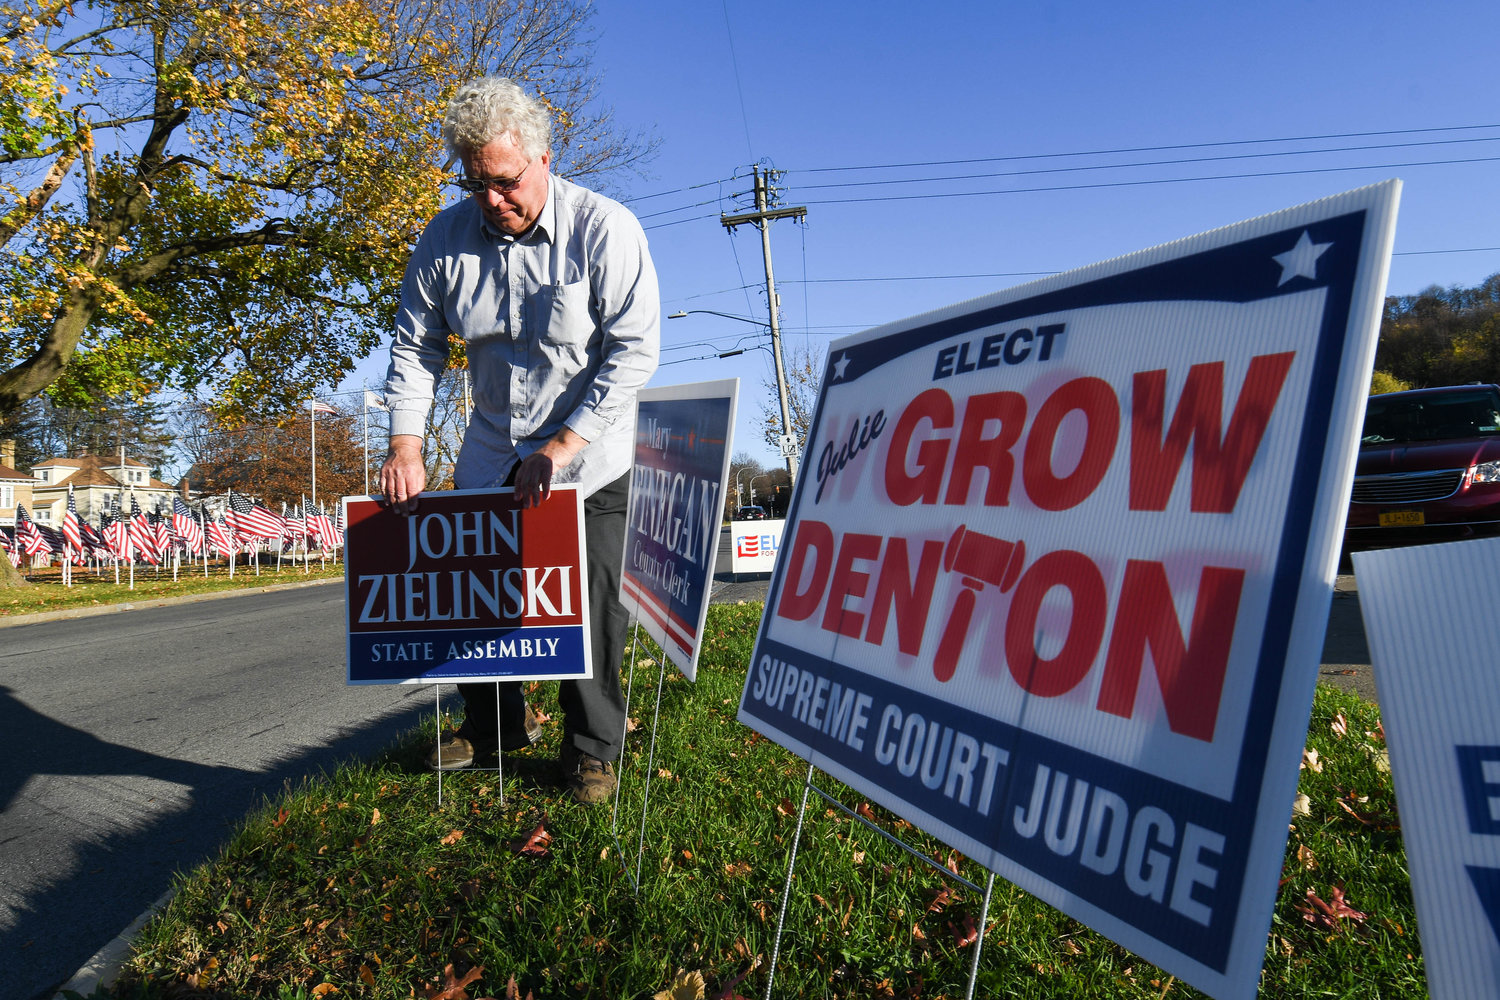 State Assembly candidate John Zielinski places a lawn sign near the entrance to the Parkway Center on Tuesday, Nov. 8 in Utica. Oneida County election commissioners reported a busy day at the polls, with some 4,500 to 4,700 voters each hour going to cast their ballots across the county.